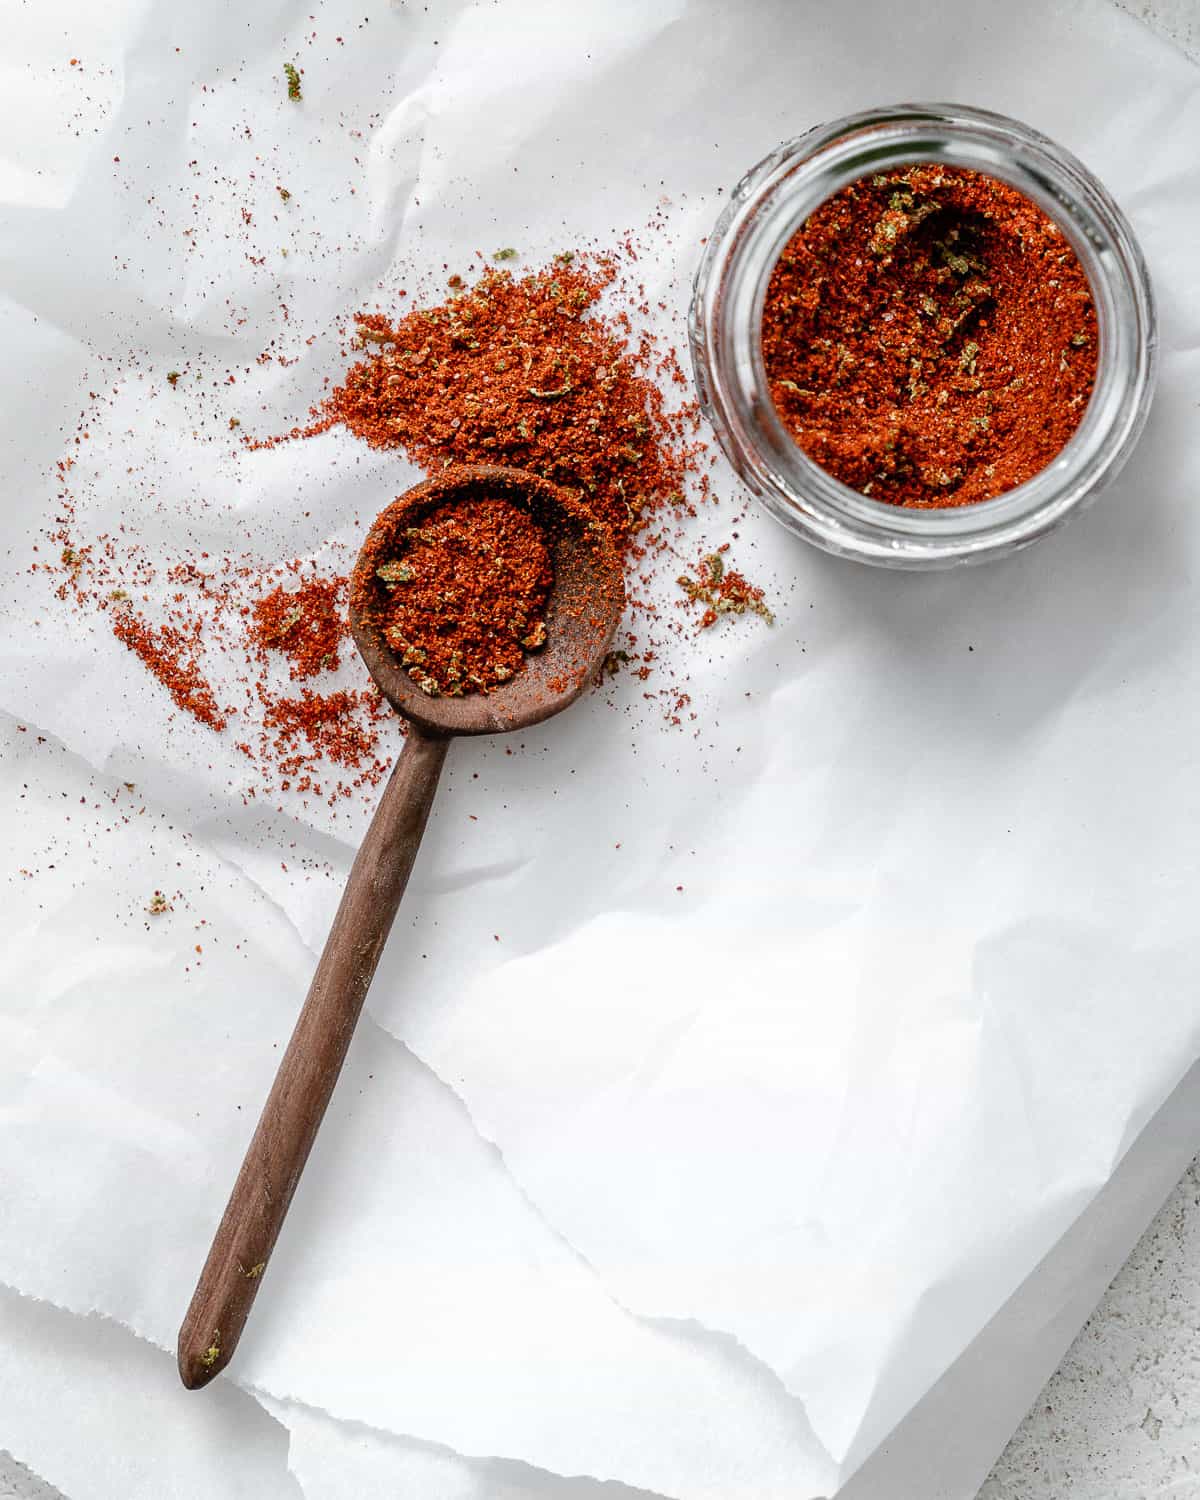 completed Homemade Chili Lime Seasoning (Tajin) against a white surface